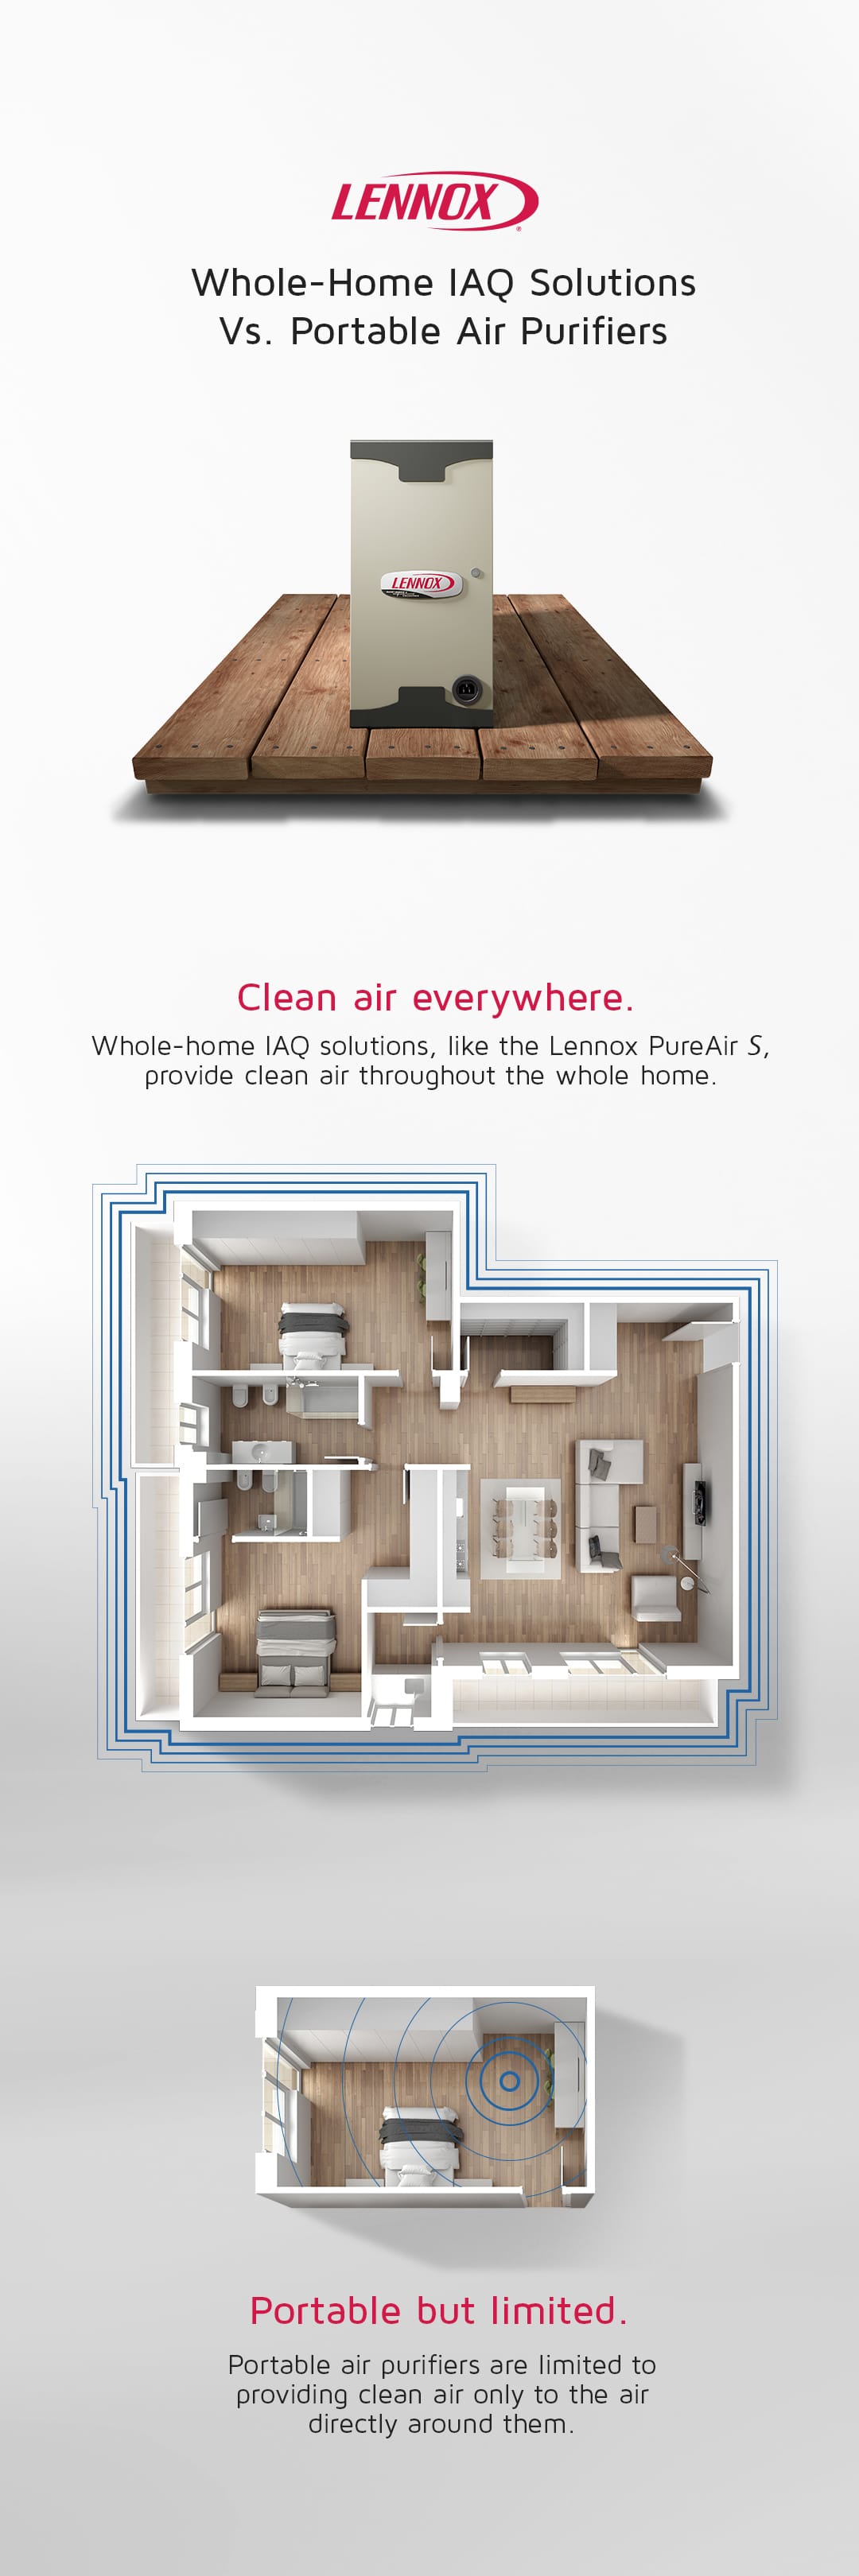 Air purification graphic